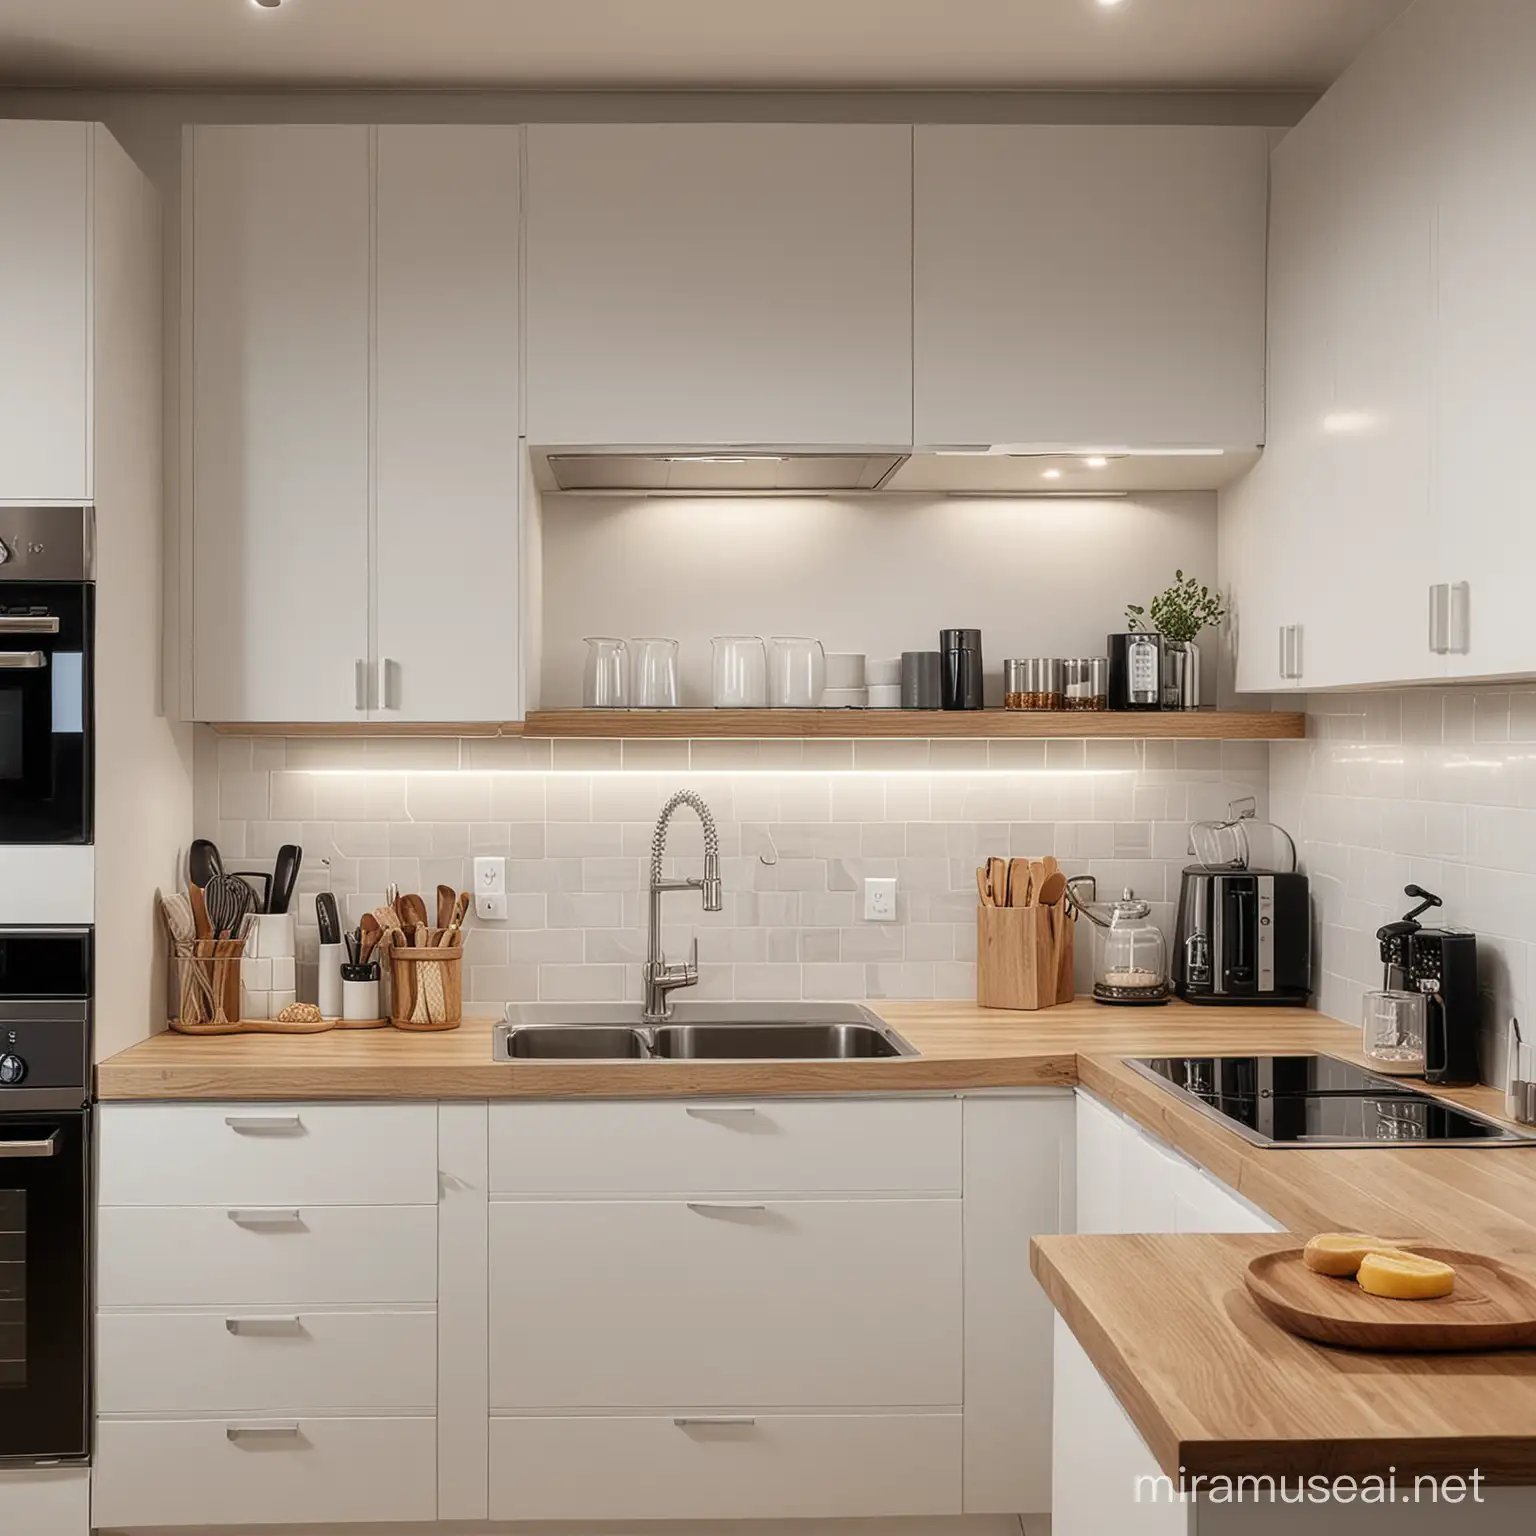 Modern Kitchen with CloseUp of Electrical Devices